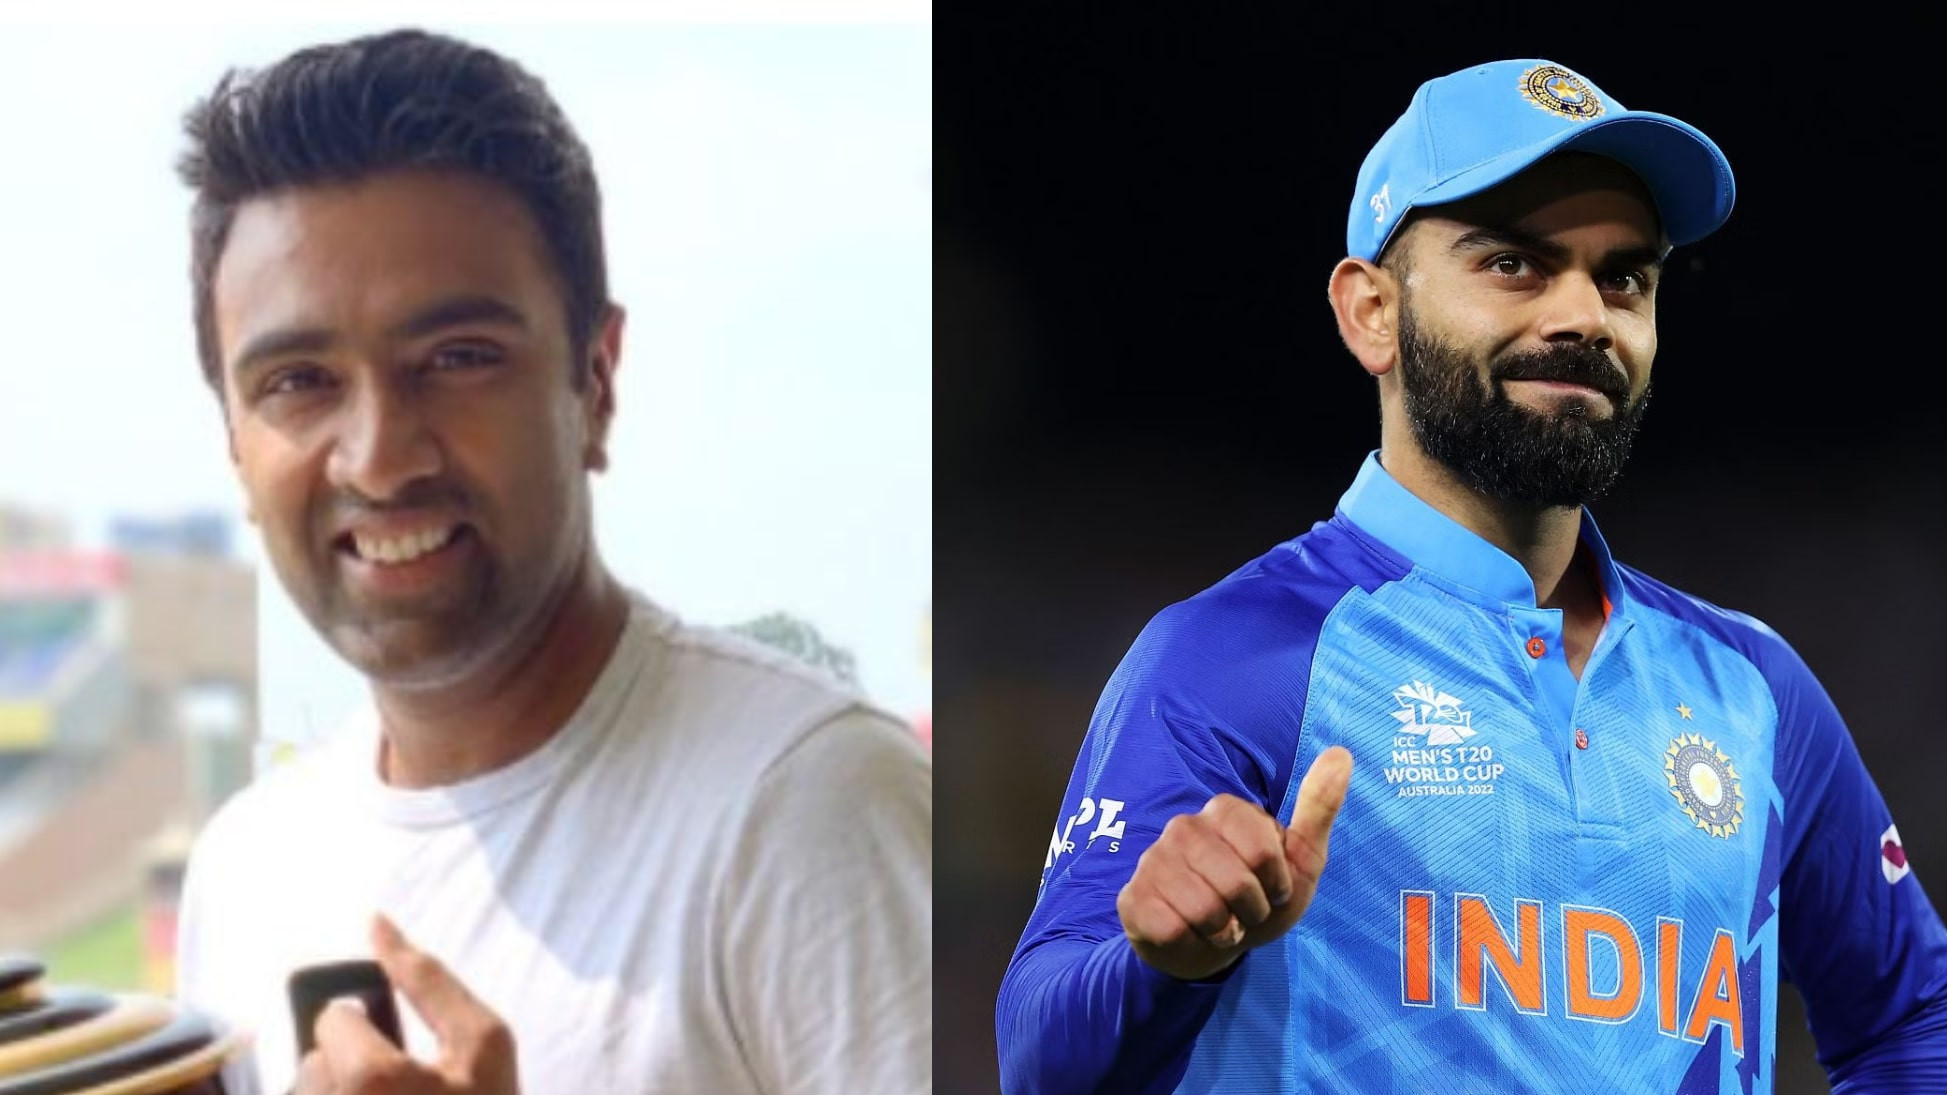 ‘Imagine the outrage if Kohli, Root or Rohit get run out at non-striker’s end in World Cup semi-final,’ says R Ashwin